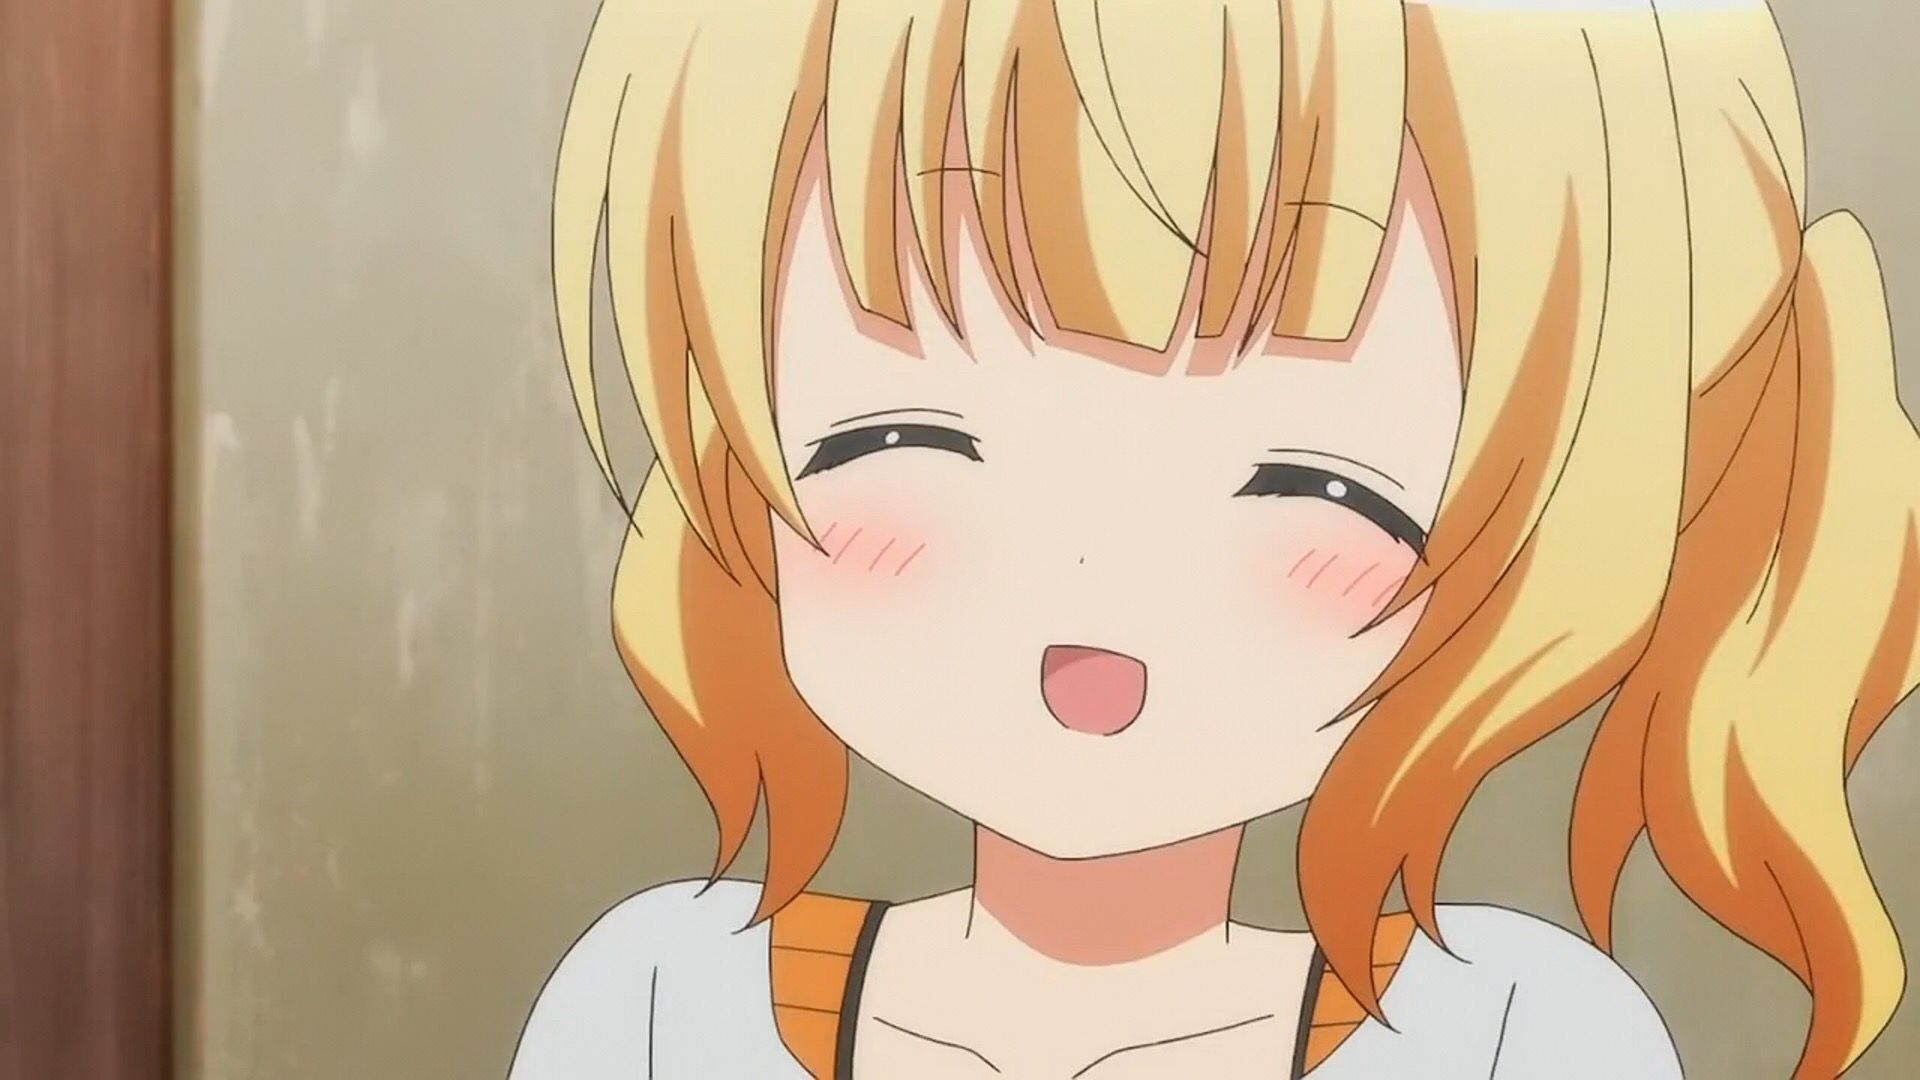 [There is an image] in Kirara anime speaking of cute girl character wwwwwwww 17